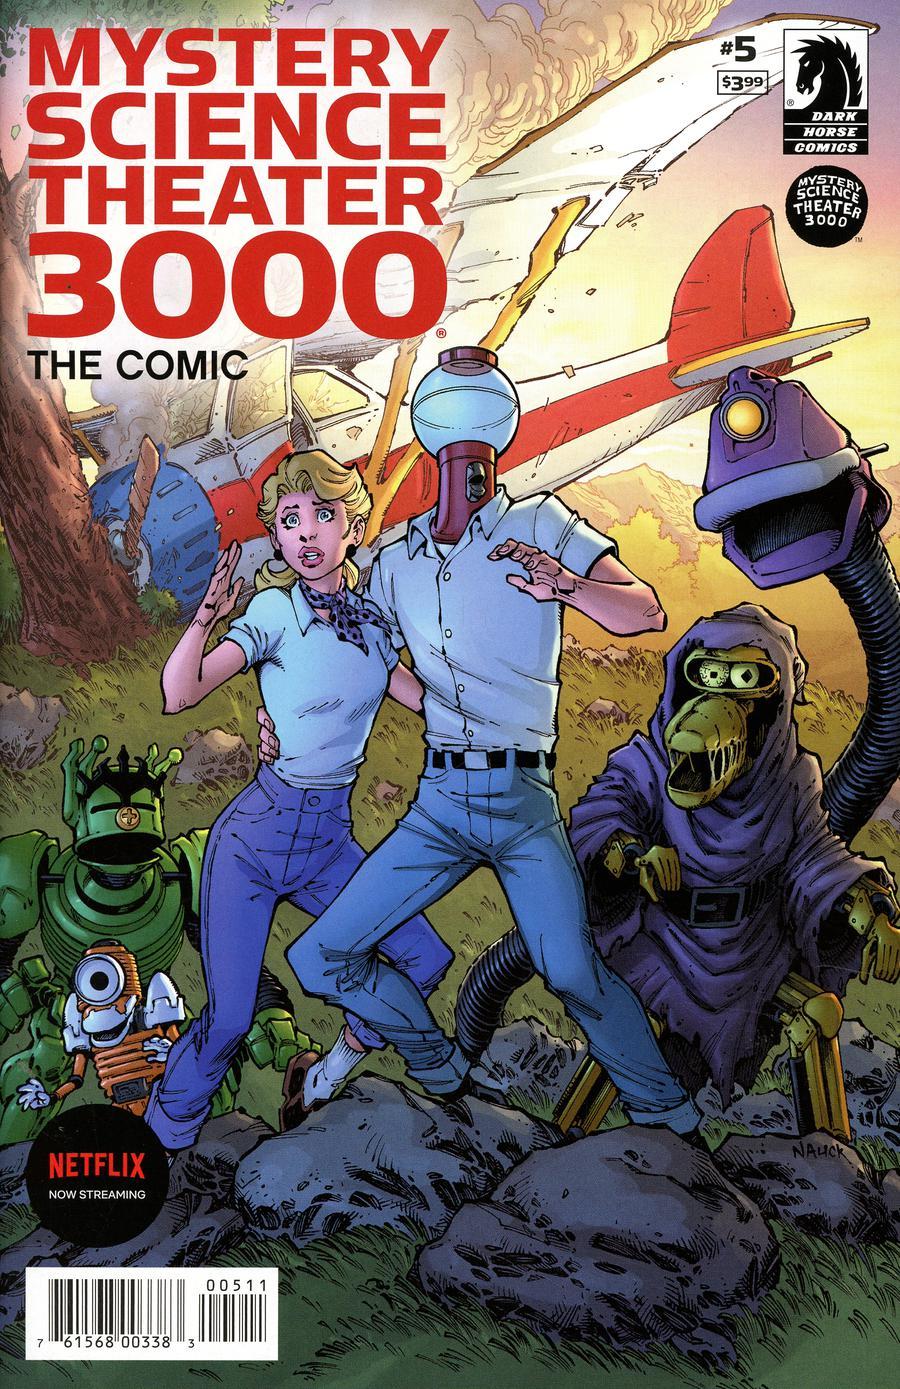 Mystery Science Theater 3000 Vol. 1 #5